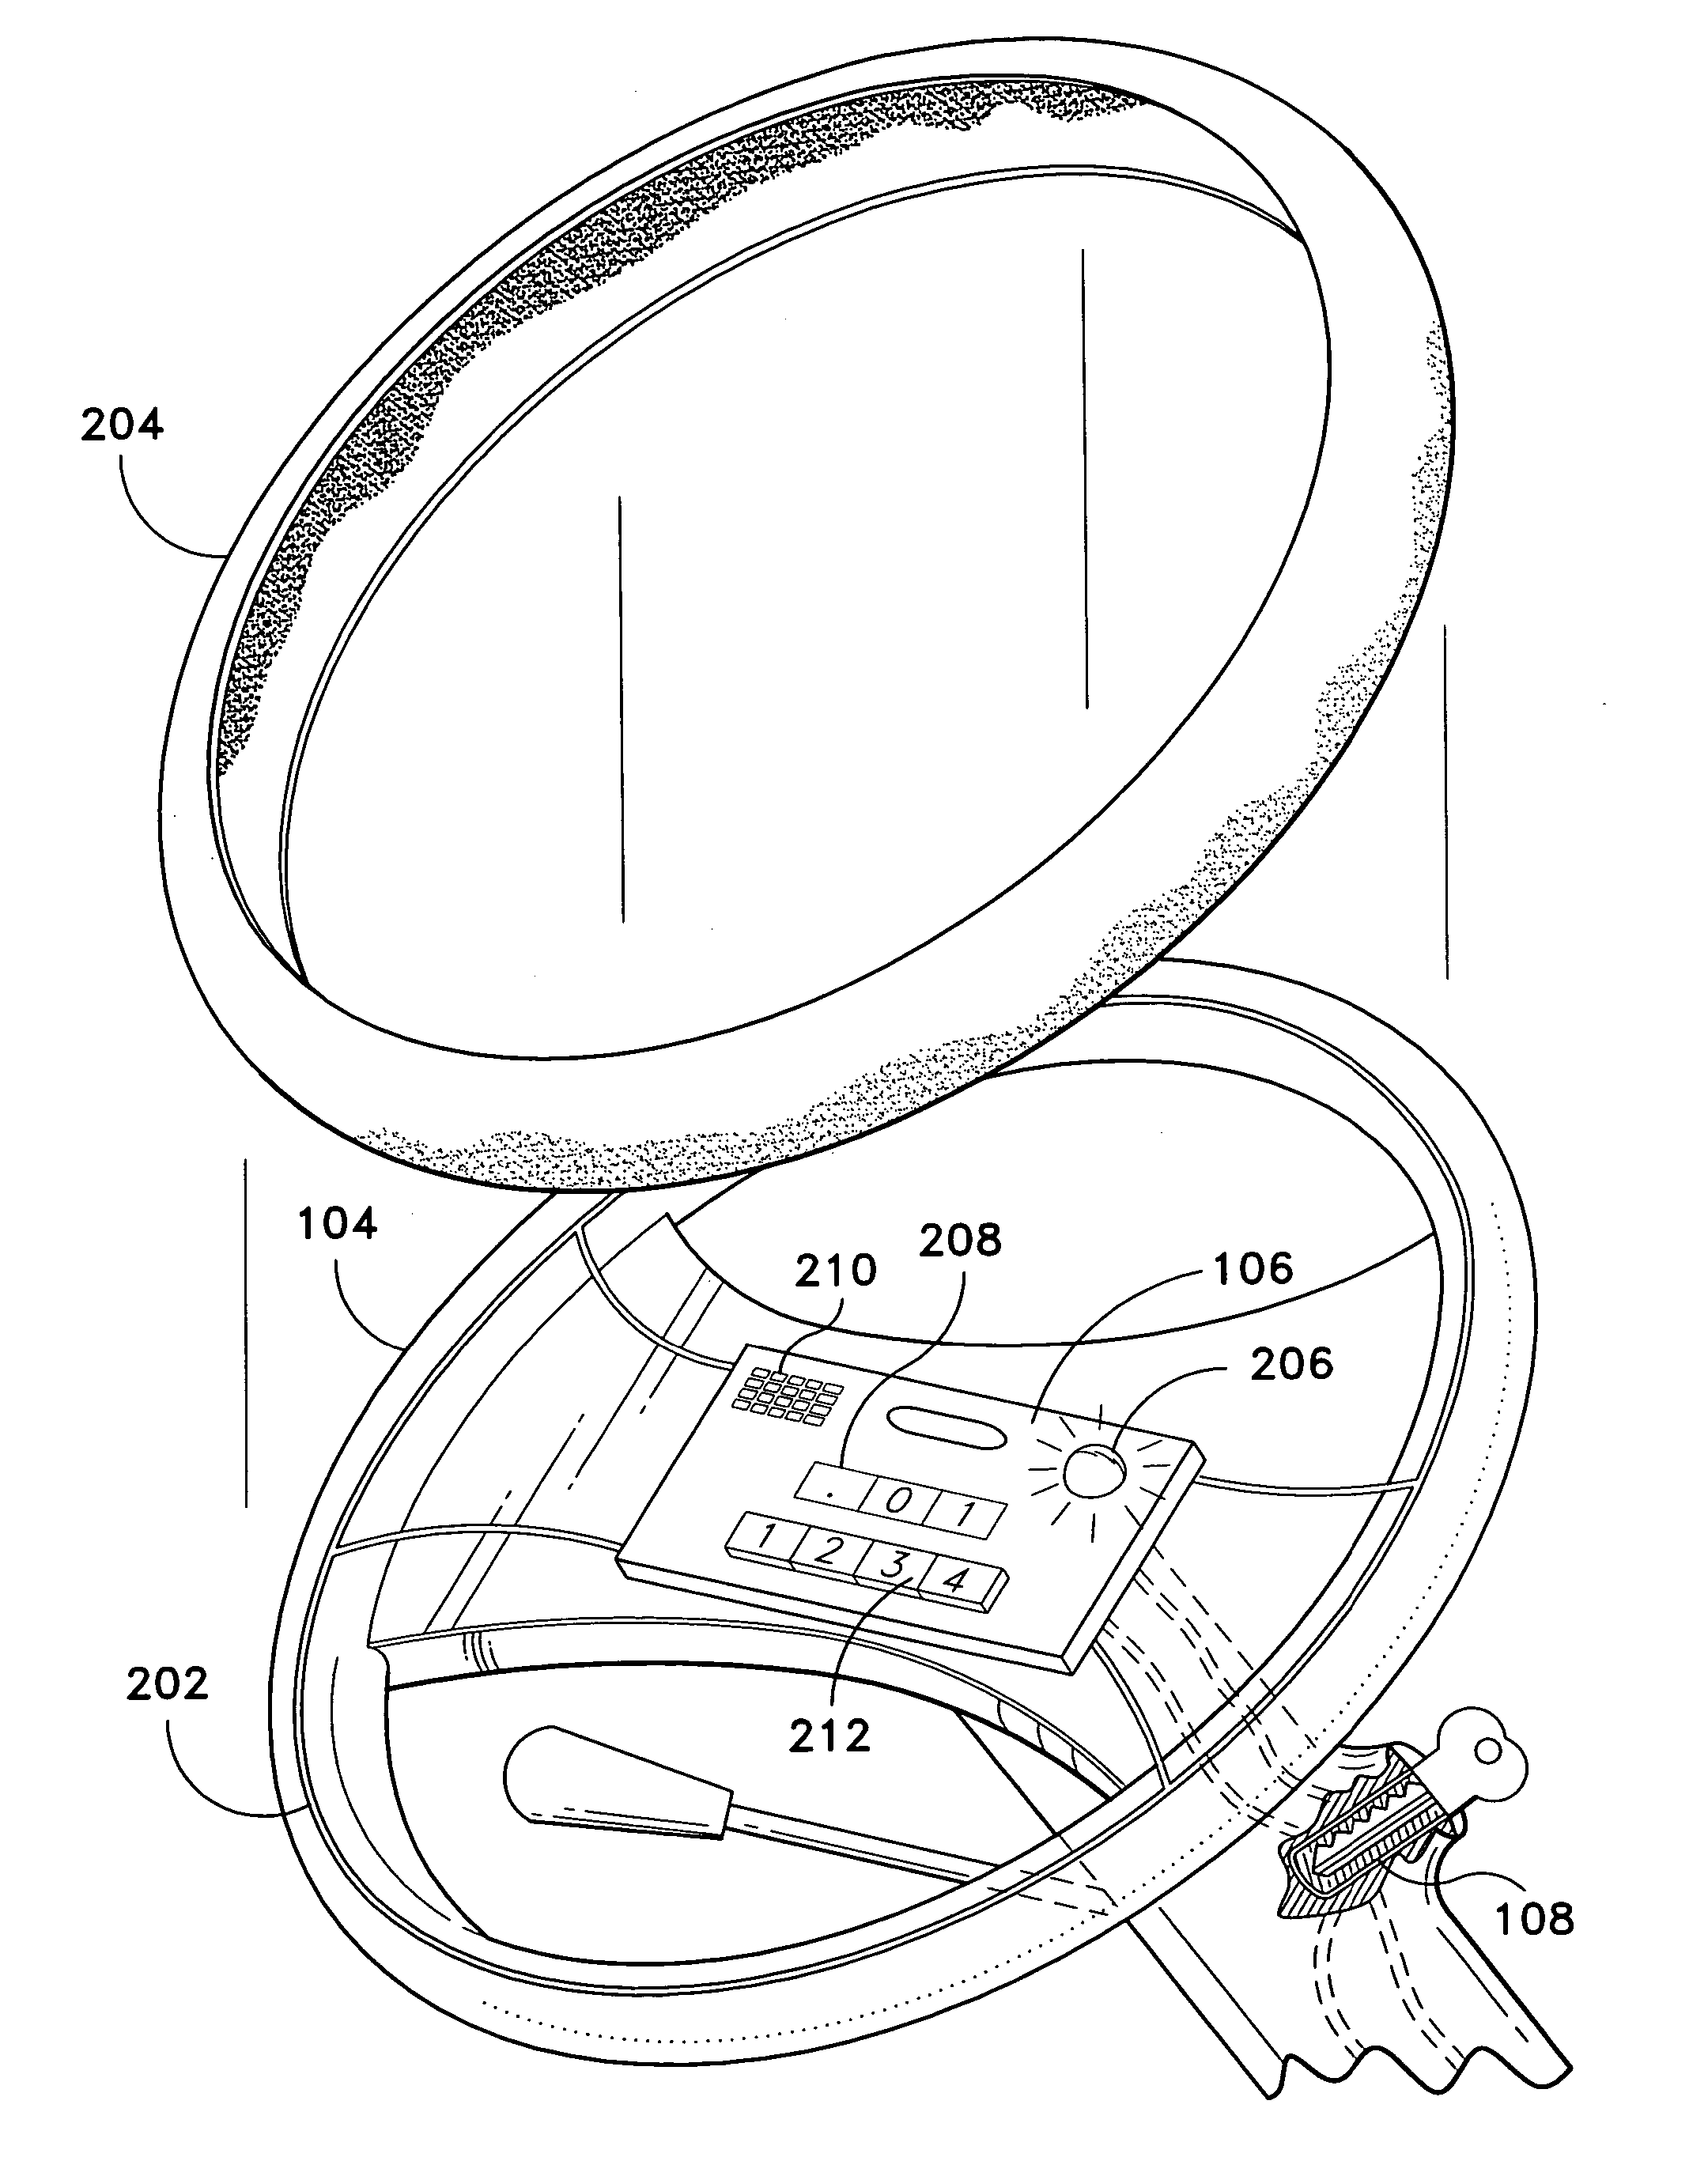 Alcohol ignition interlock system and method